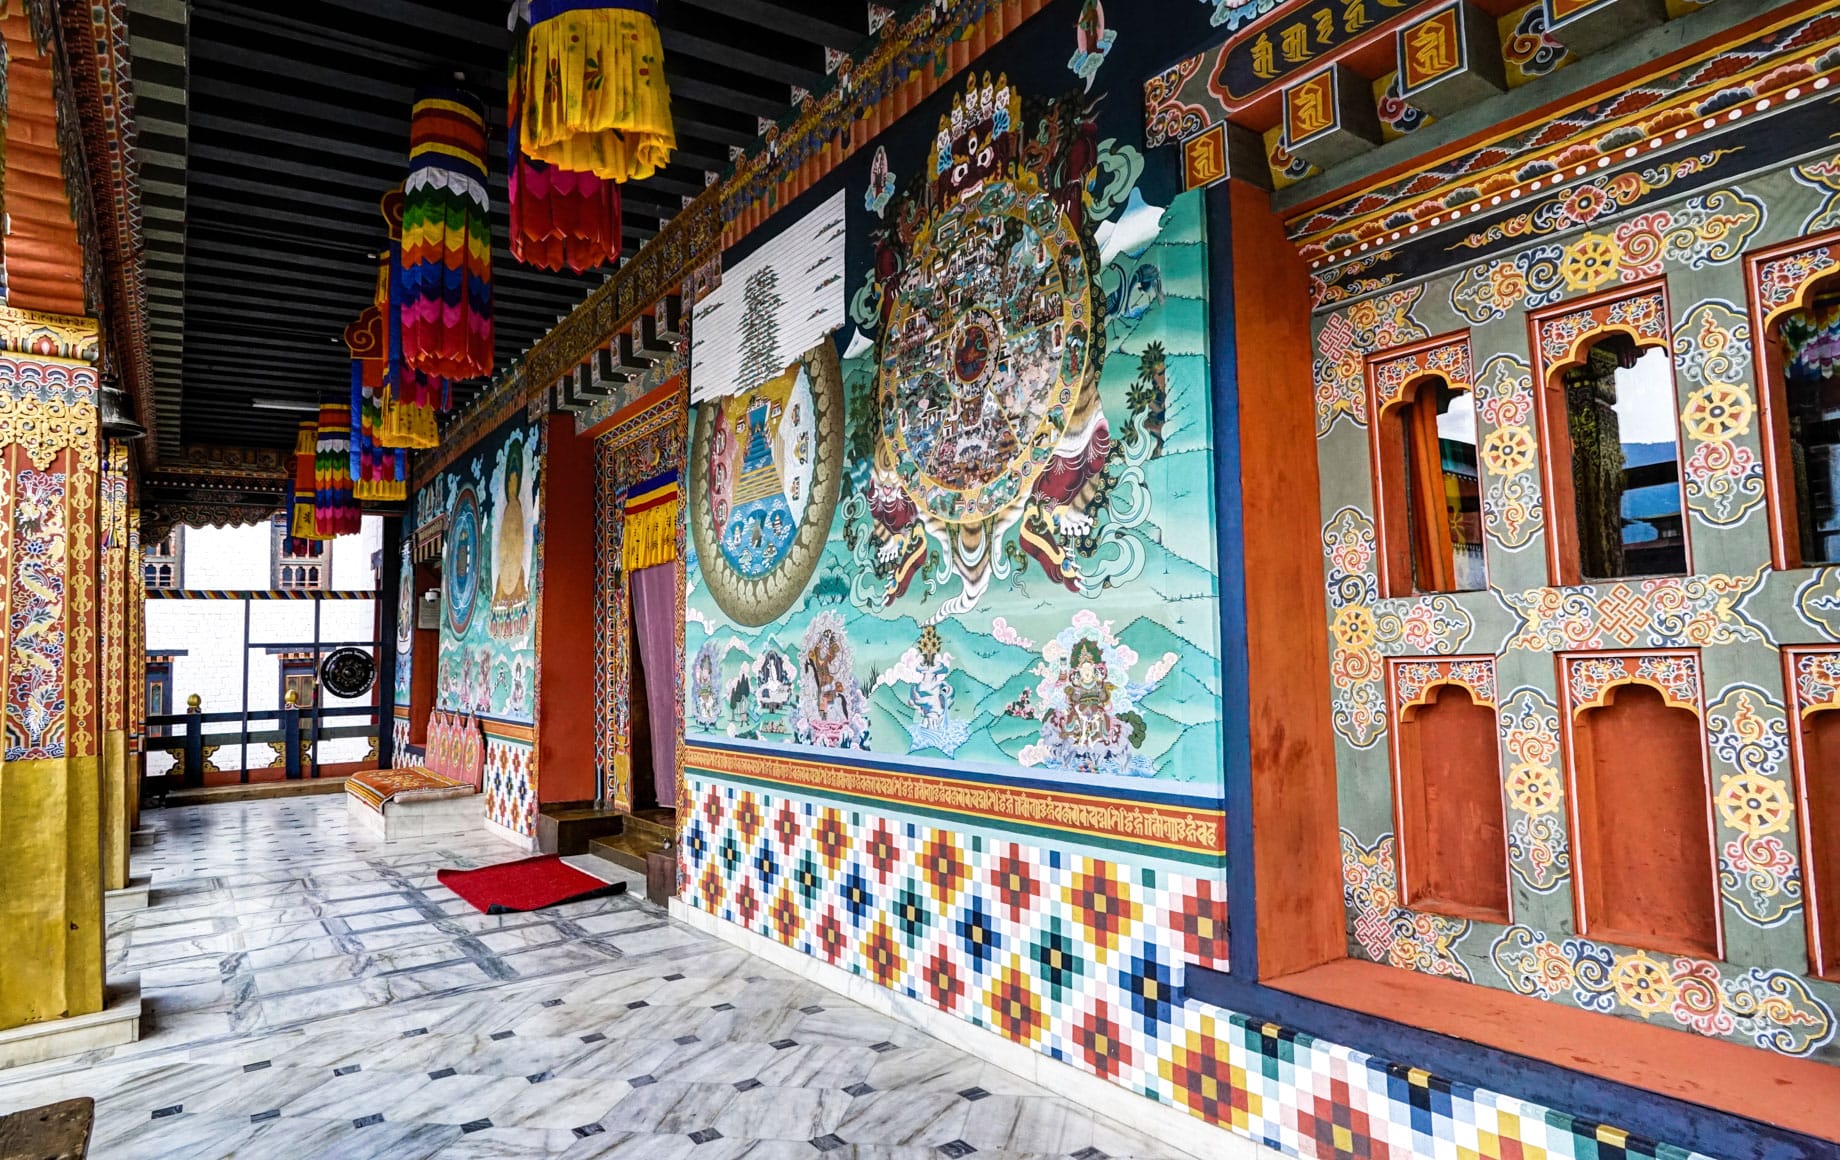 Traditional architecture in the kingdom of Bhutan